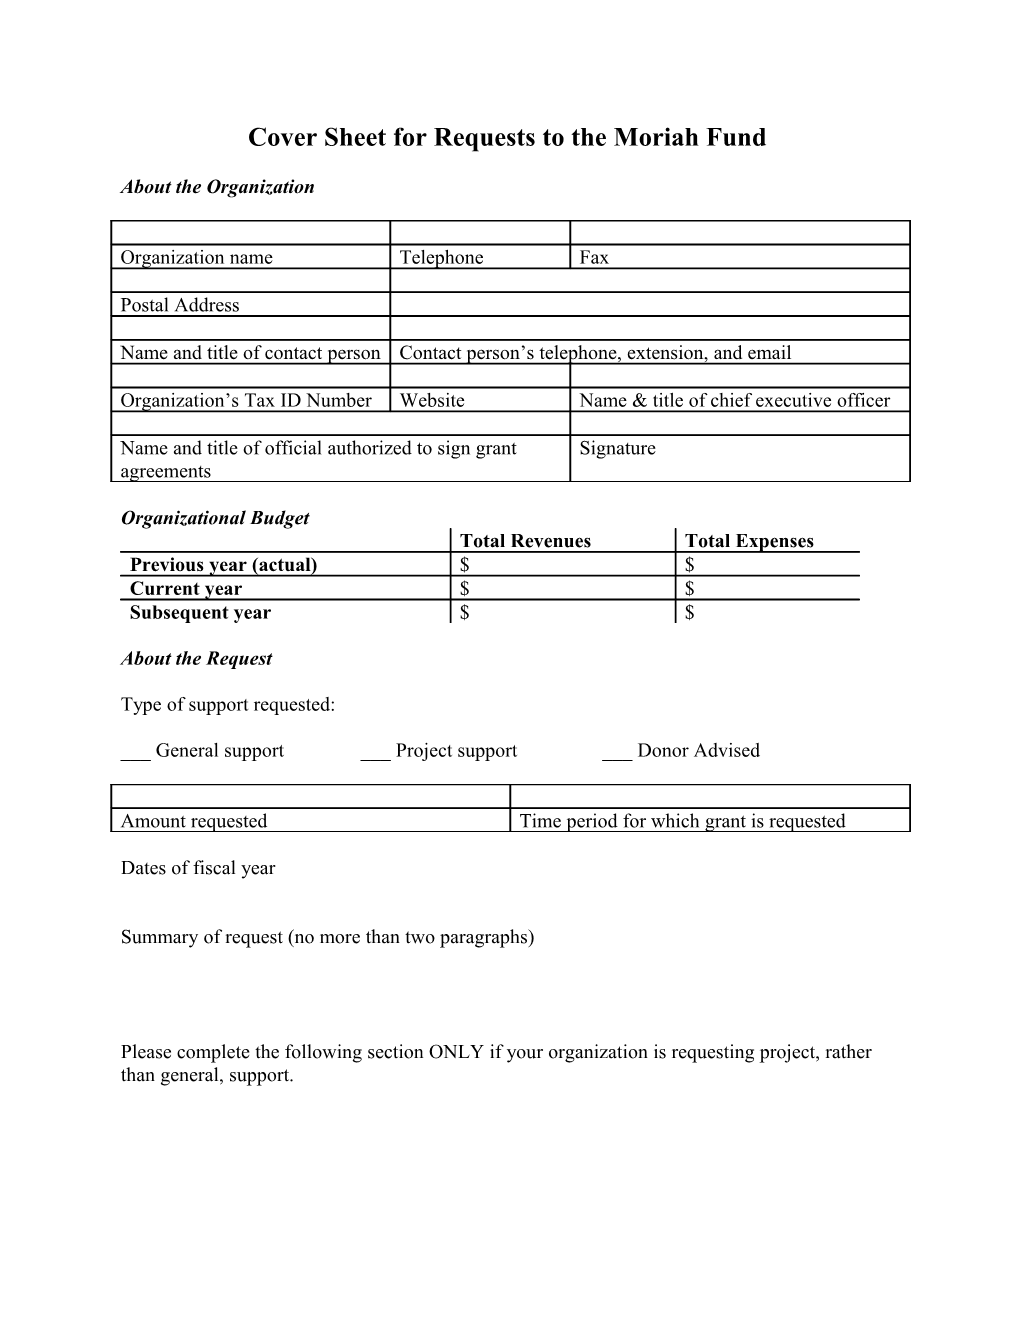 Cover Sheet for General Support Requests